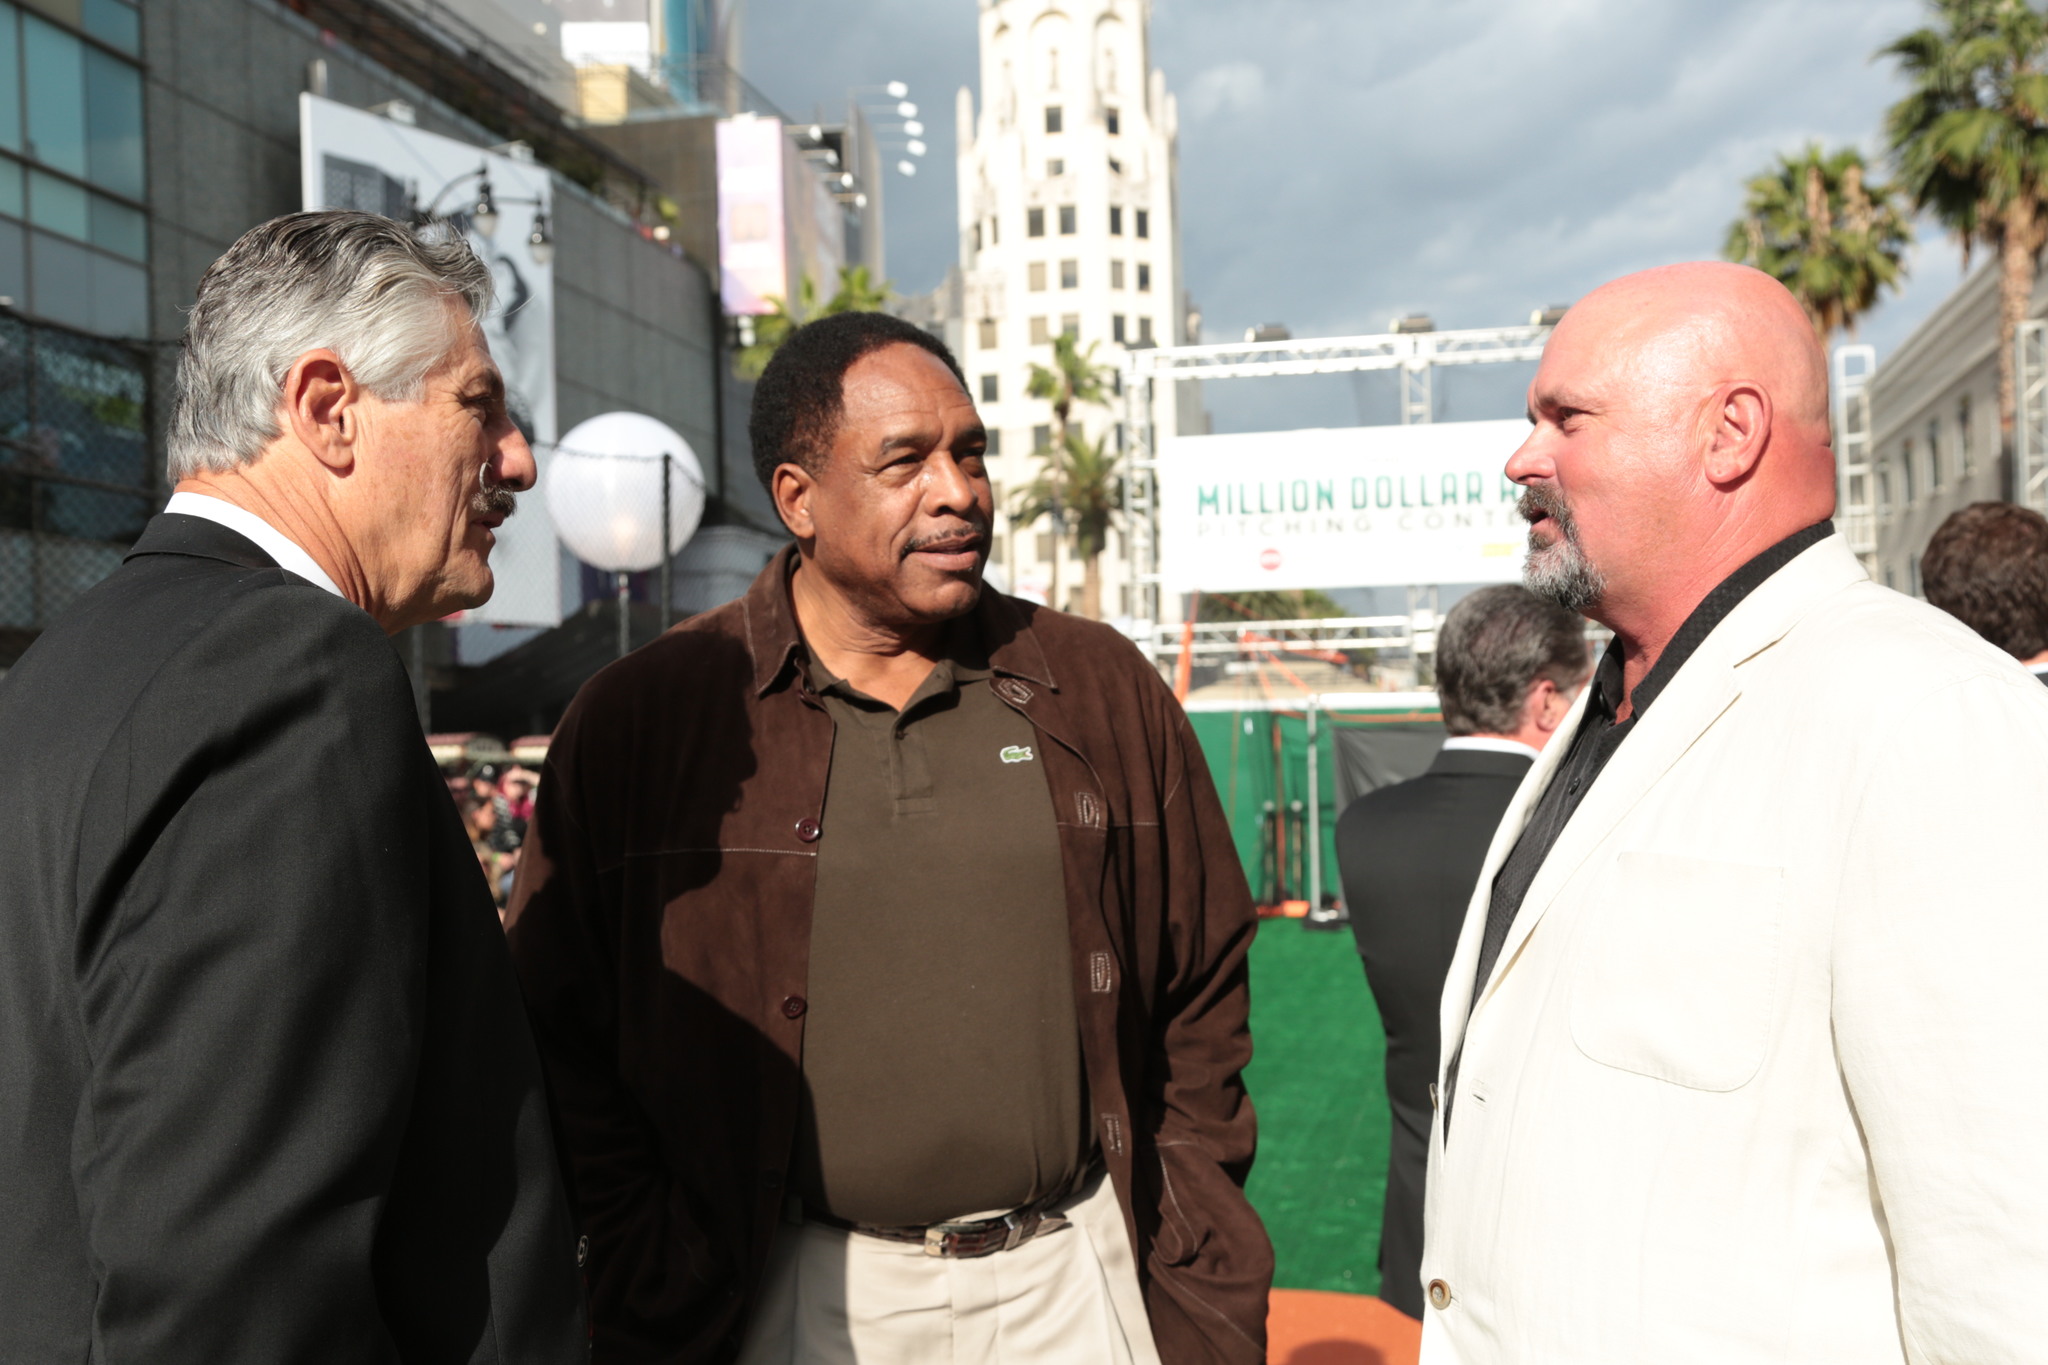 David Wells, Dave Winfield and Rollie Fingers at event of Million Dollar Arm (2014)